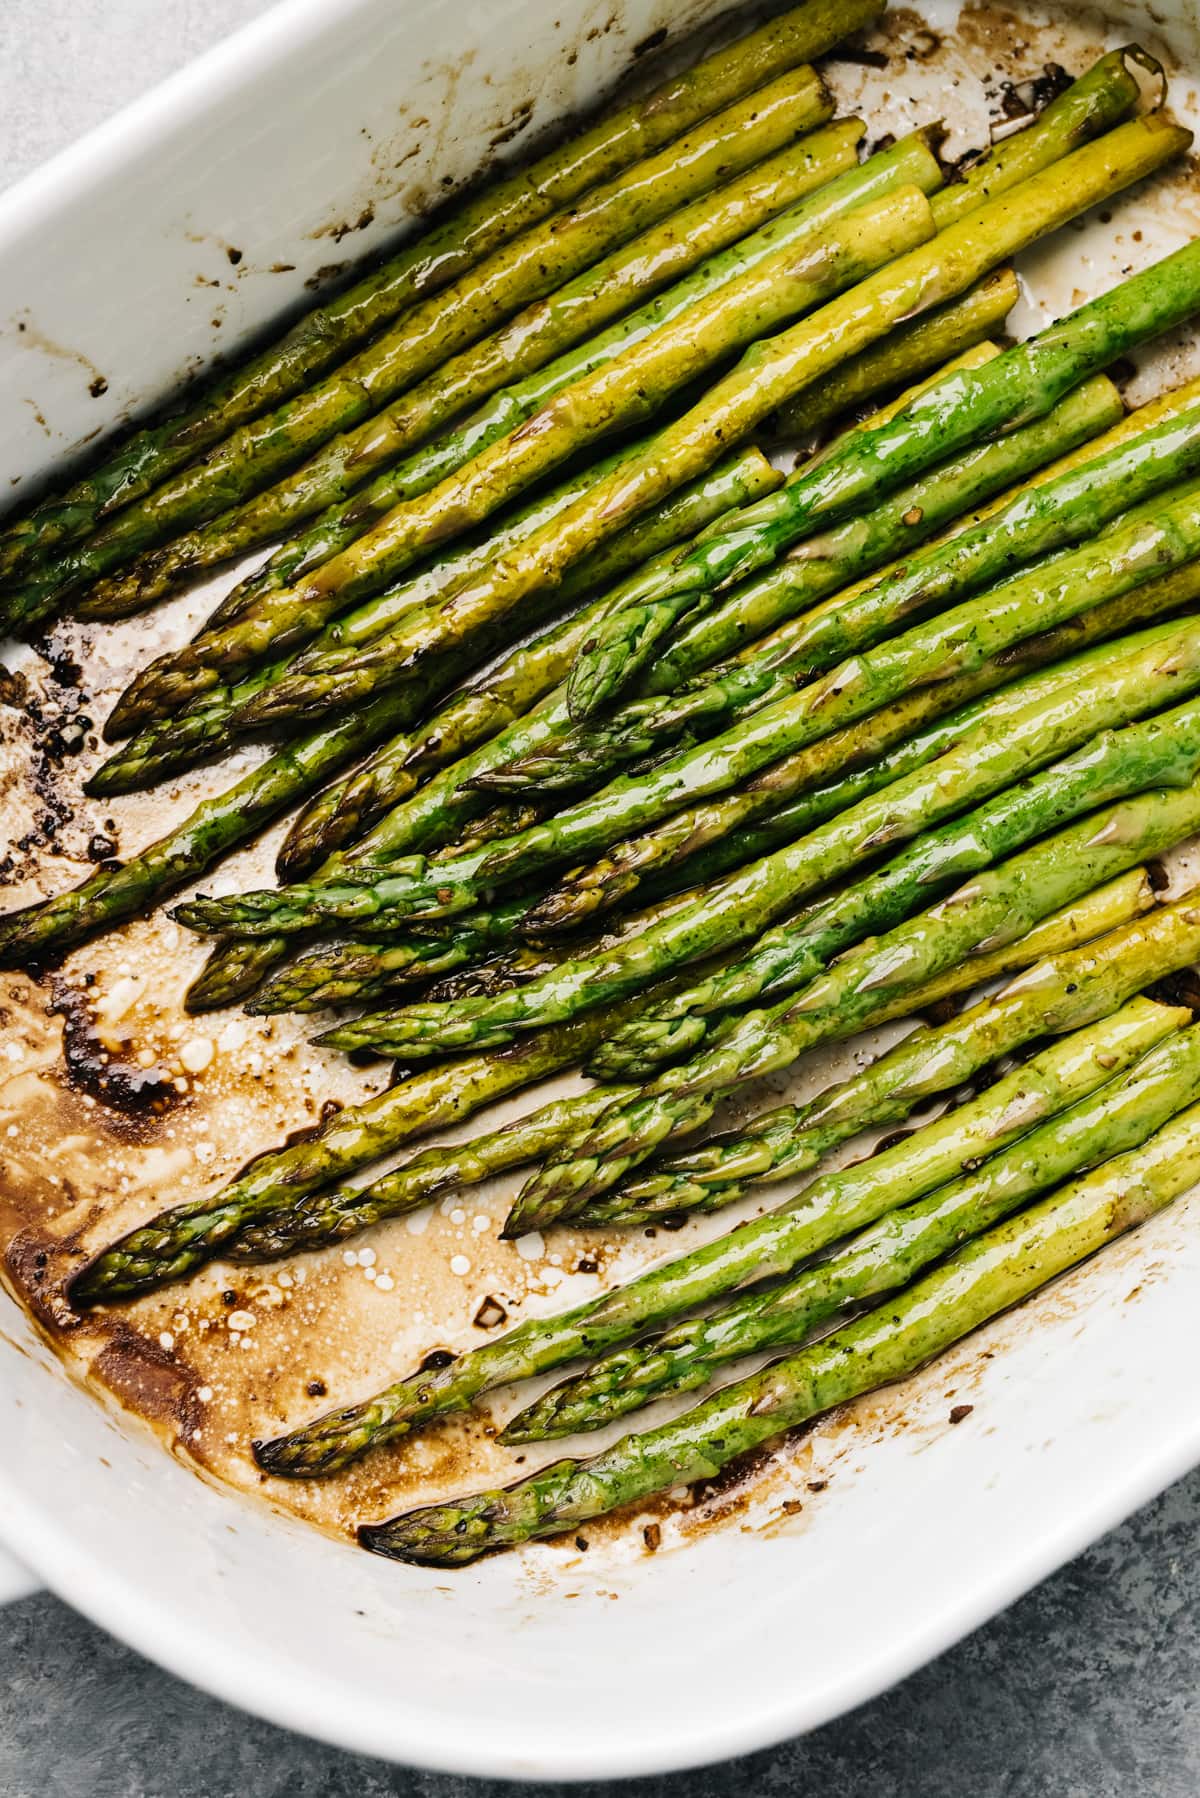 Balsamic baked asparagus spears in a casserole dish.